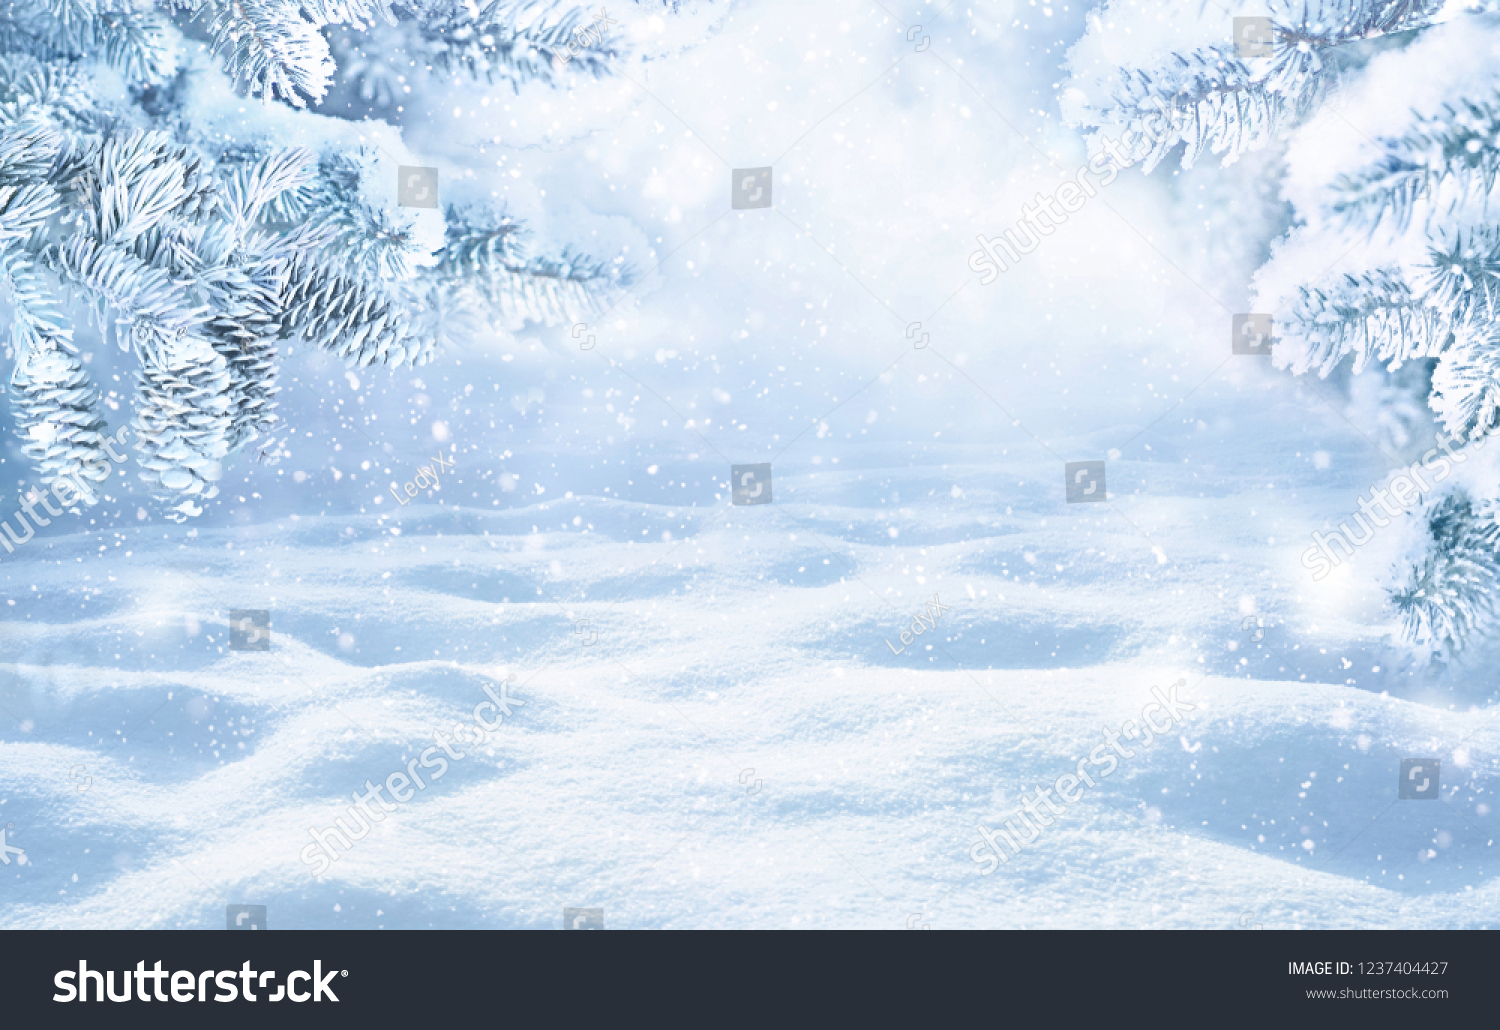 Winter Christmas scenic background with copy space. Snow landscape with spruce branches with cones covered snow close-up, snowdrifts and falling snow on nature outdoors, toned blue. #1237404427